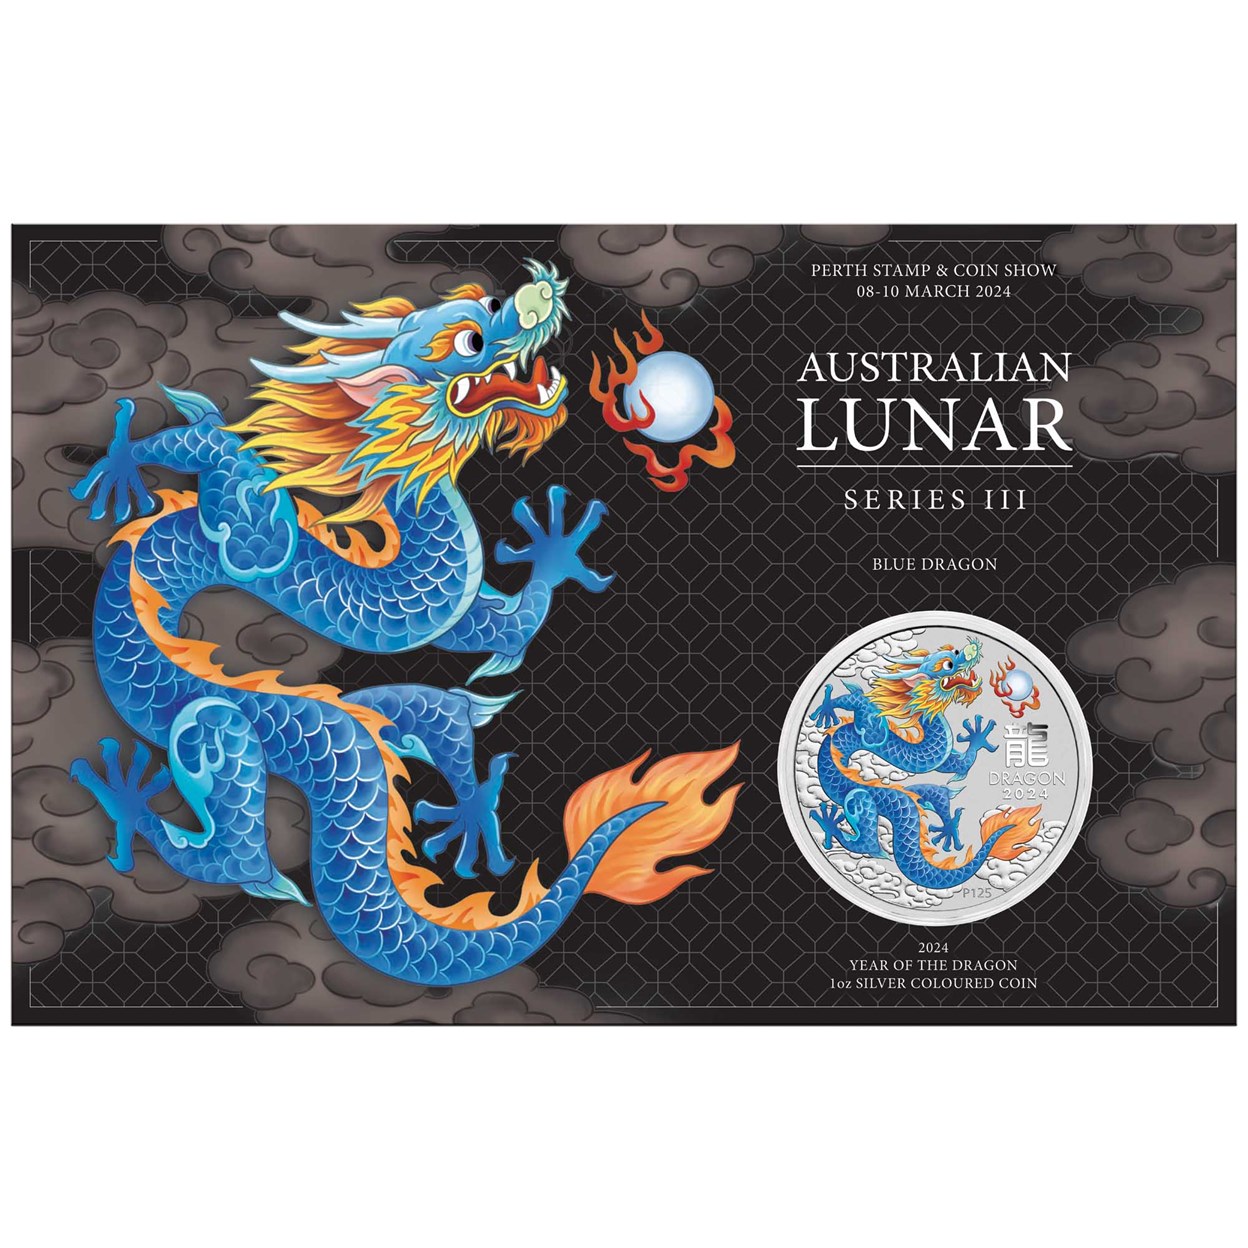 00 2024 Year of the Dragon 1 BLUE